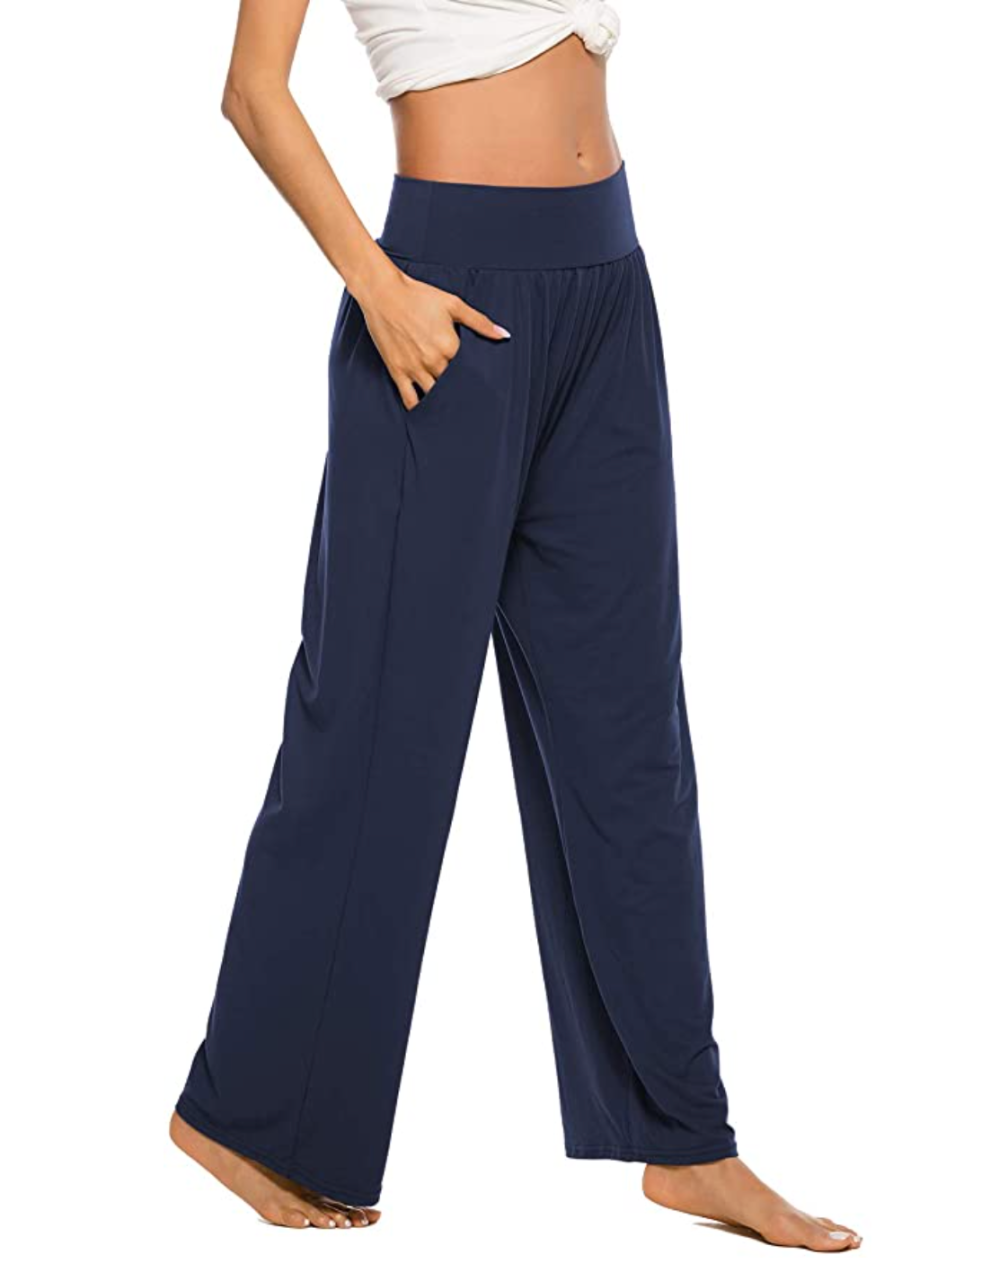 Zjct Seriously Comfy Sweats Complete Your Day-Off Lounge Look | Us Weekly